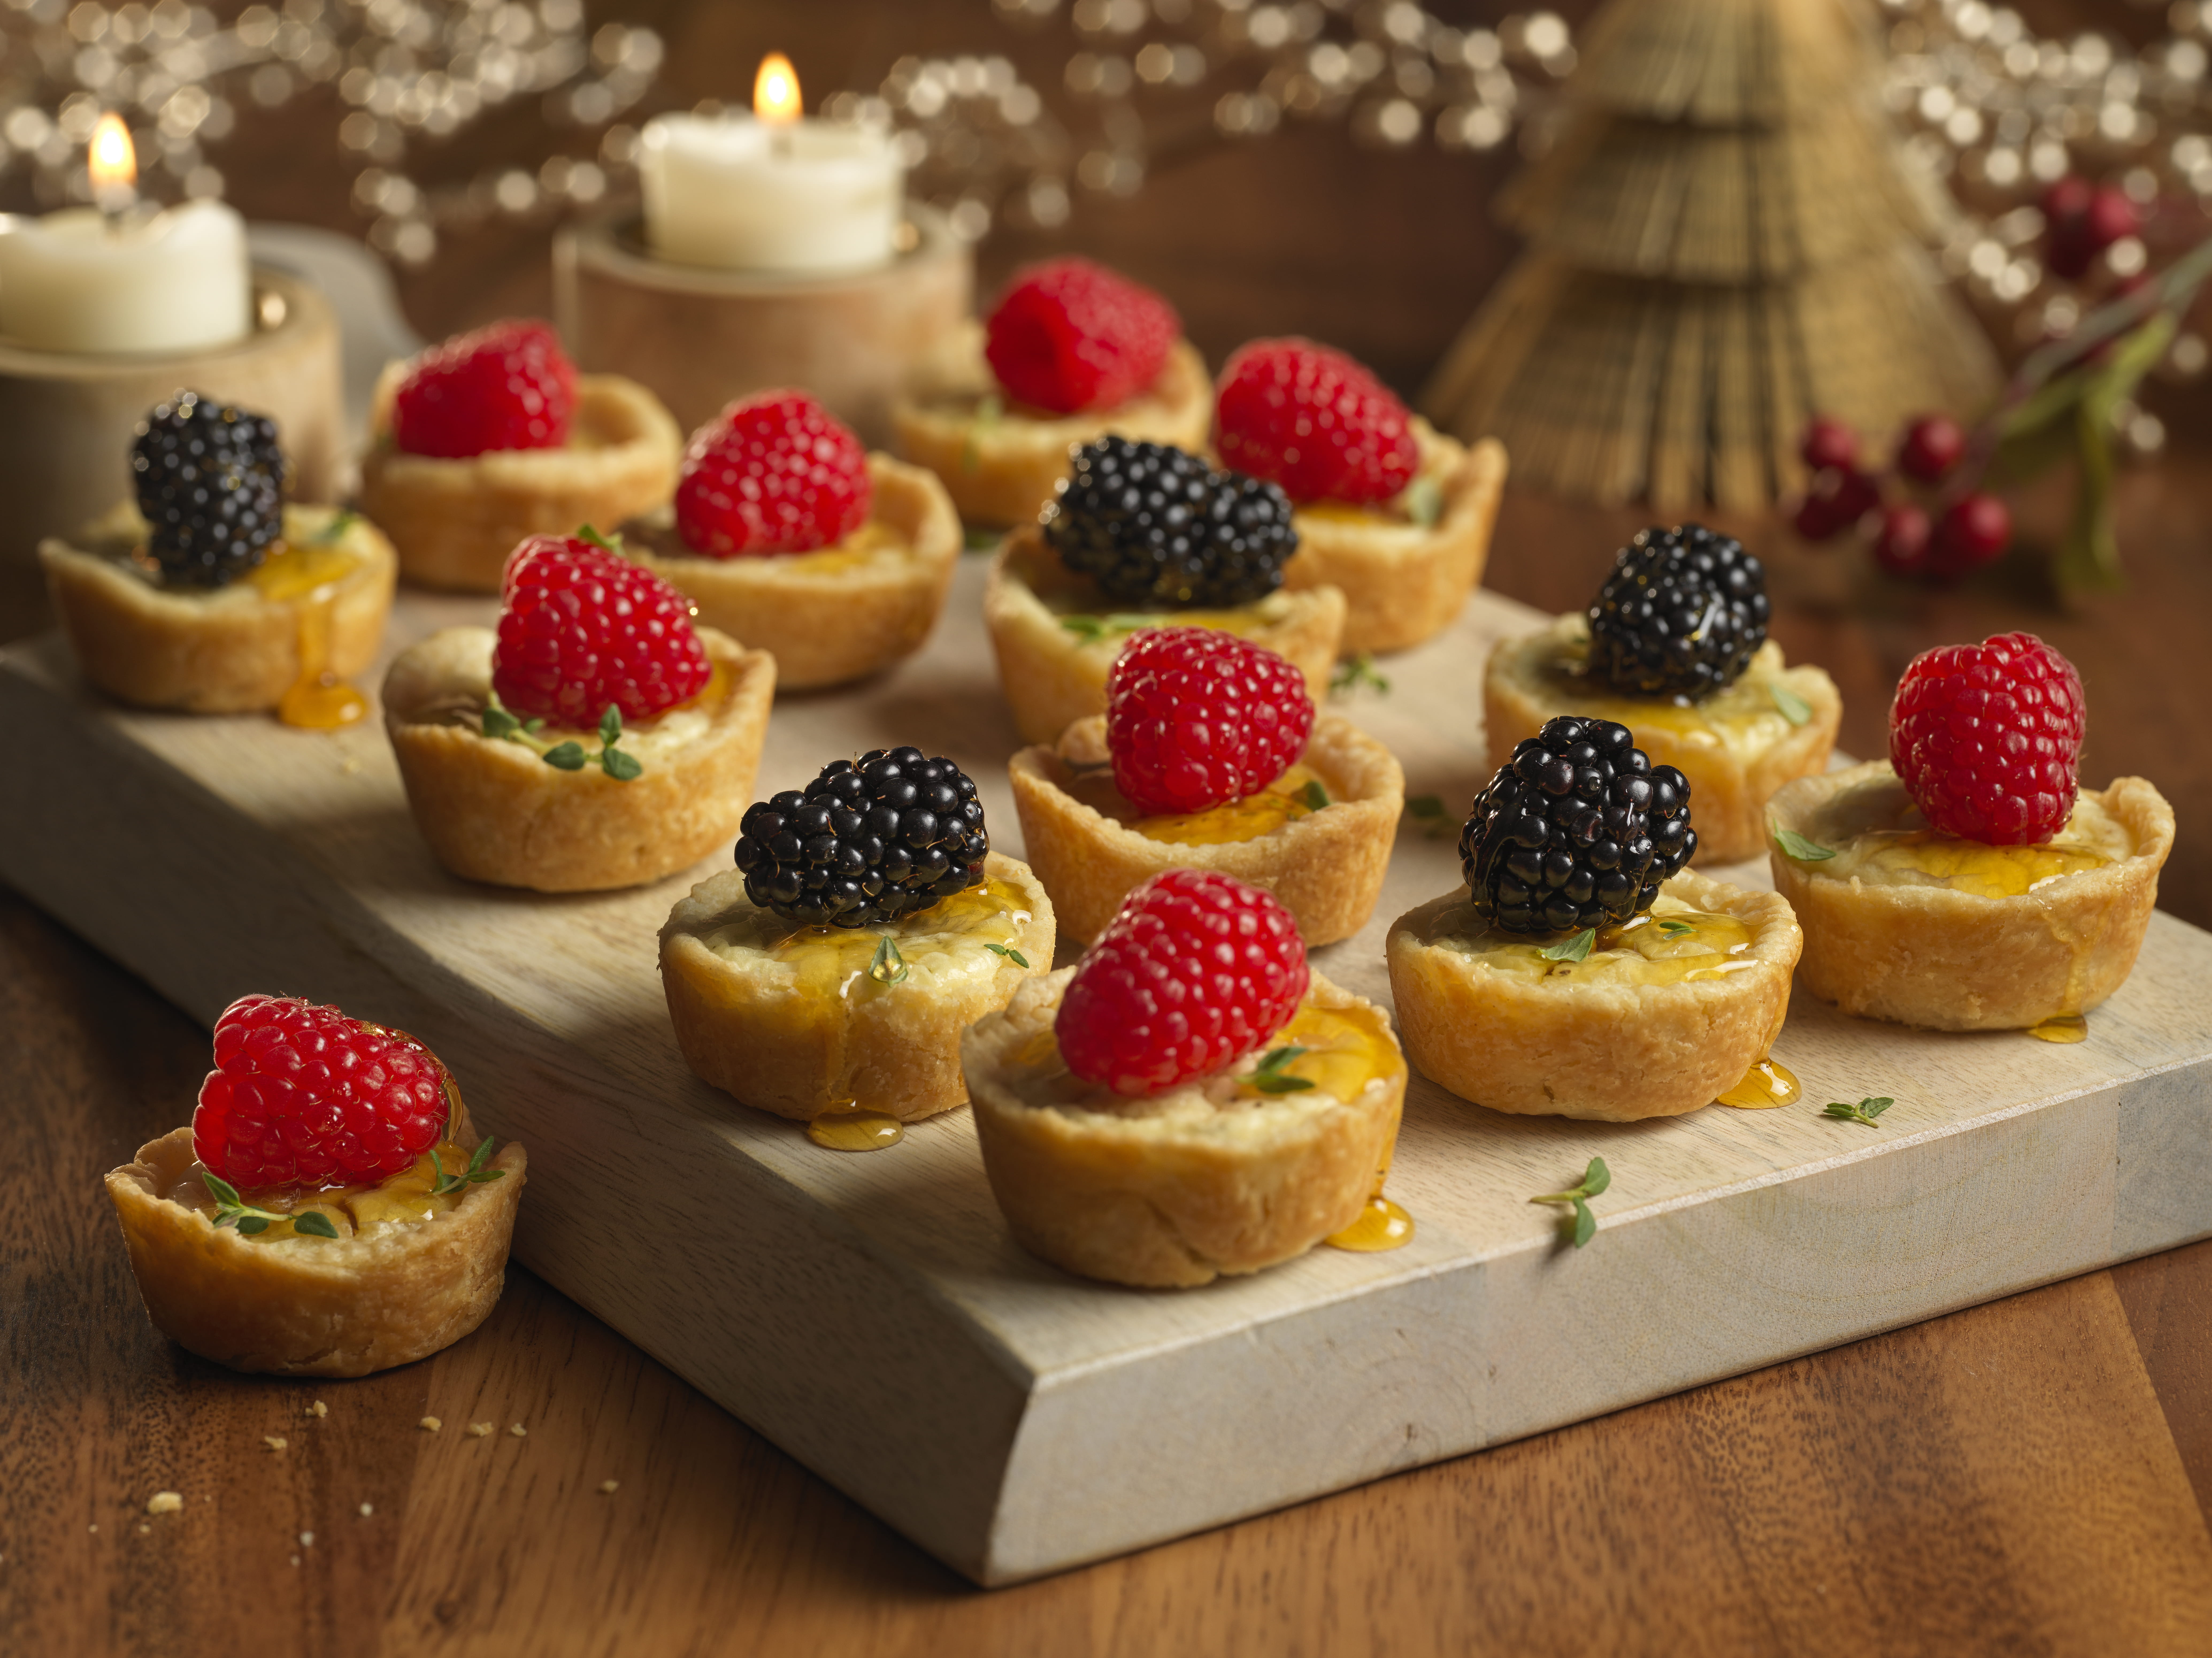 Savory Cheese Tartlets with Mixed Berries